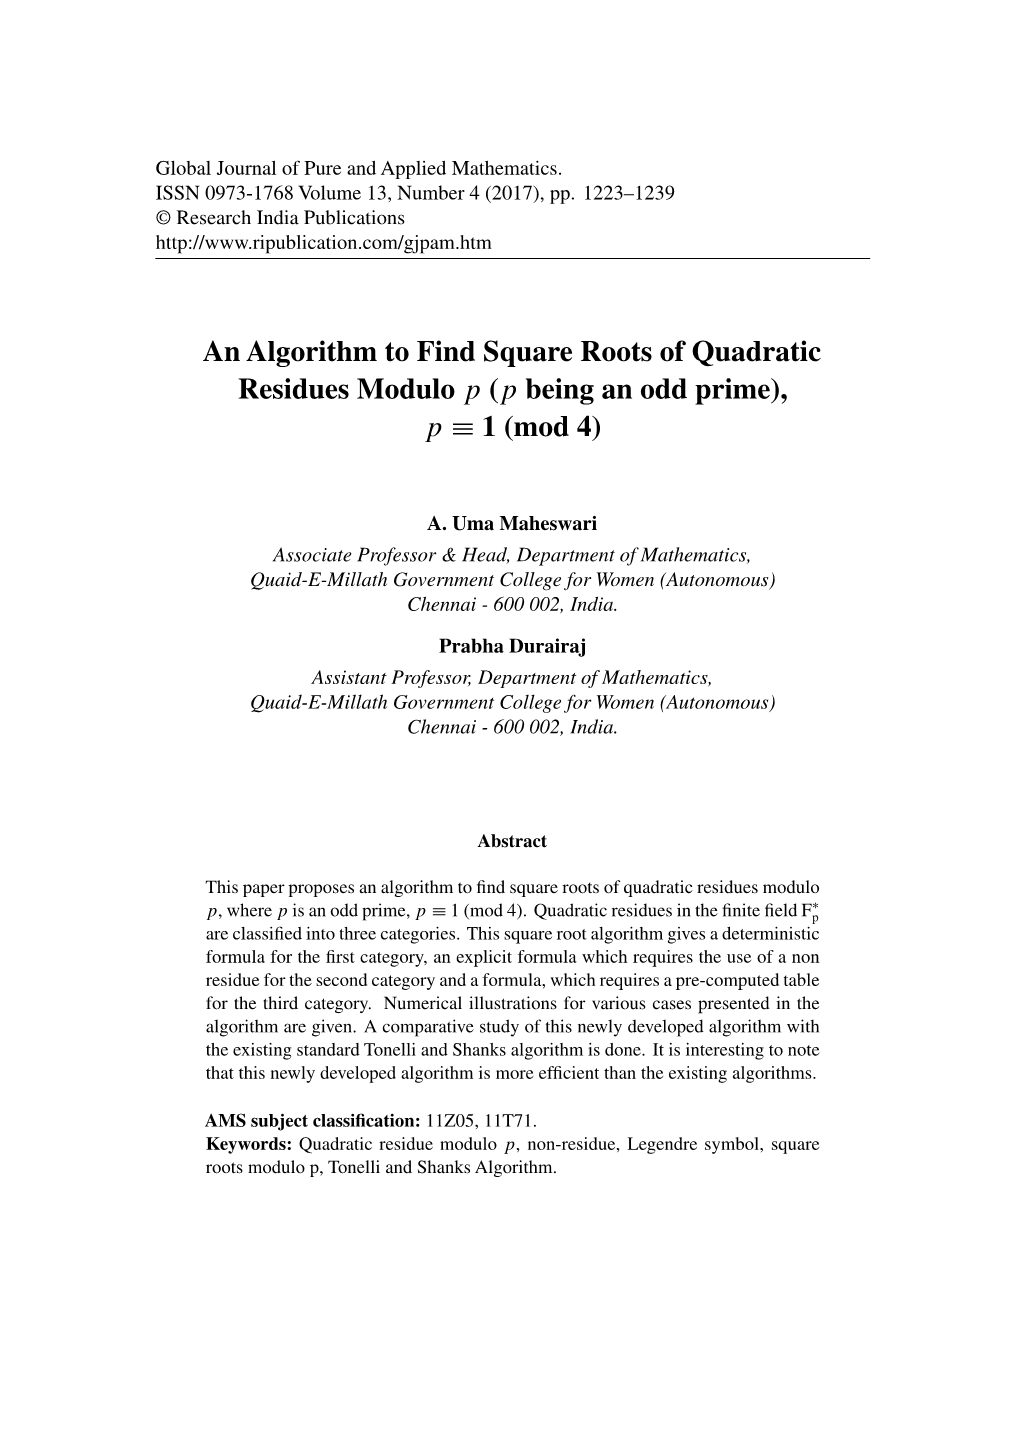 An Algorithm to Find Square Roots of Quadratic Residues Modulo P (P Being an Odd Prime), P ≡ 1 (Mod 4)